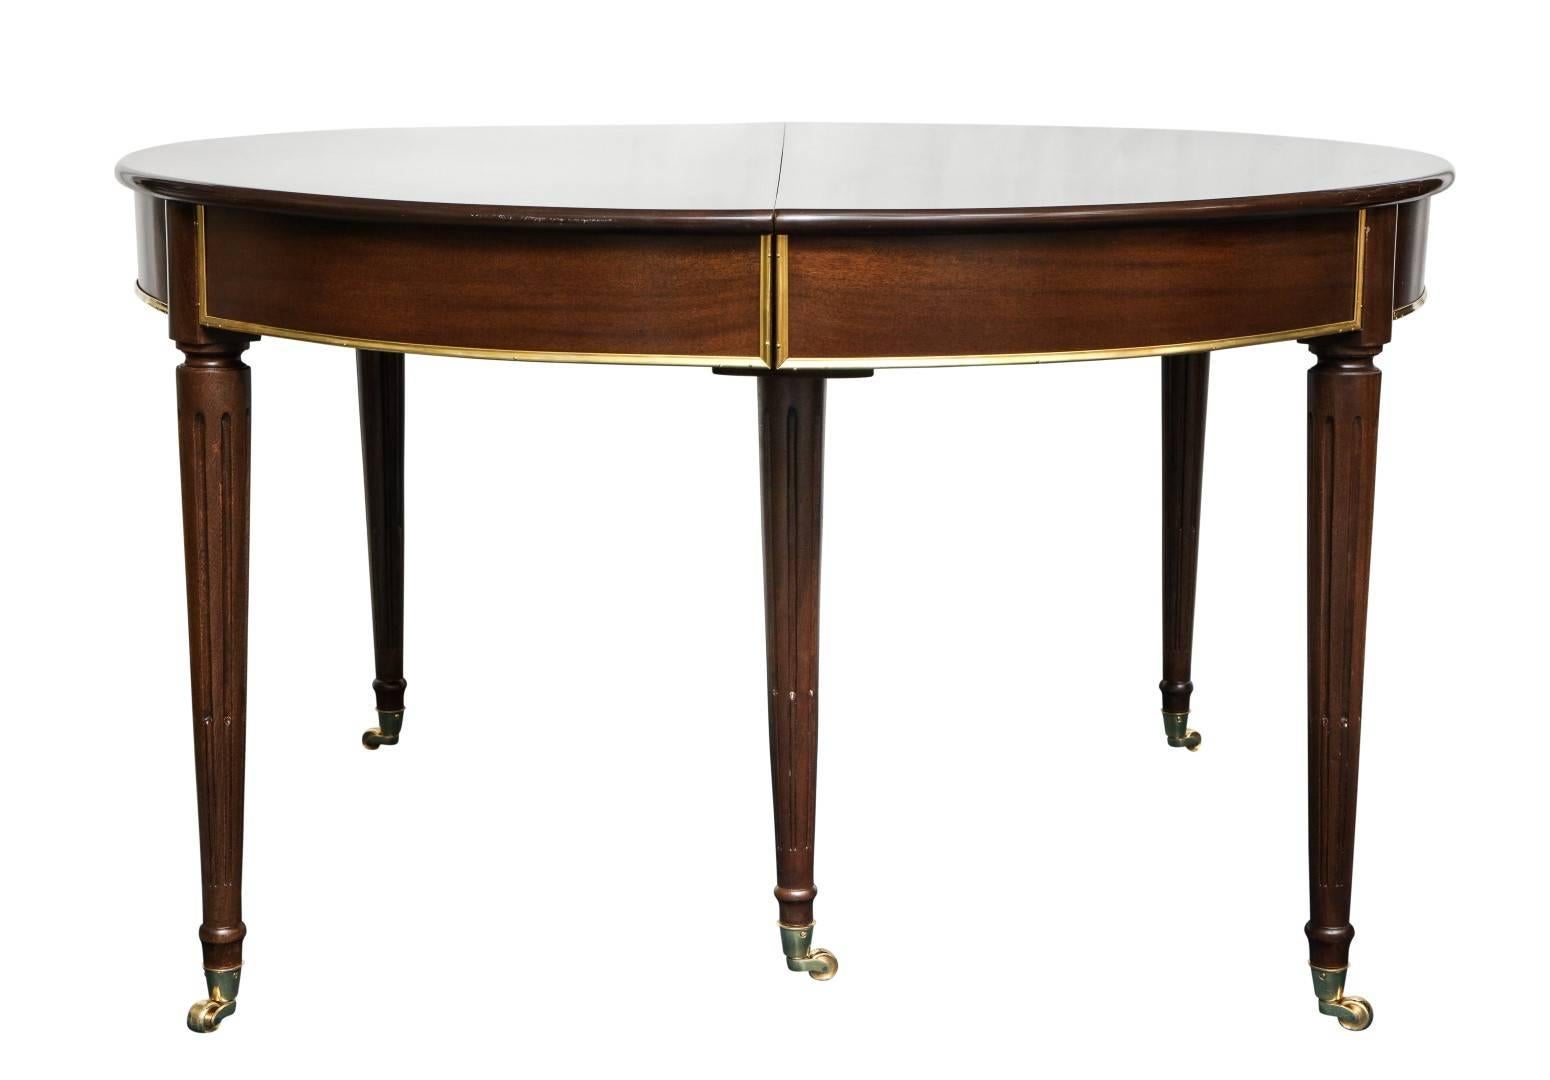 A Louis XVI style mahogany dining table, originally two semi-oval sections, four newly constructed leaves added, each stop fluted tapering leg capped with new brass collar and terminating in brass castors, additional brass on wood detail on apron,